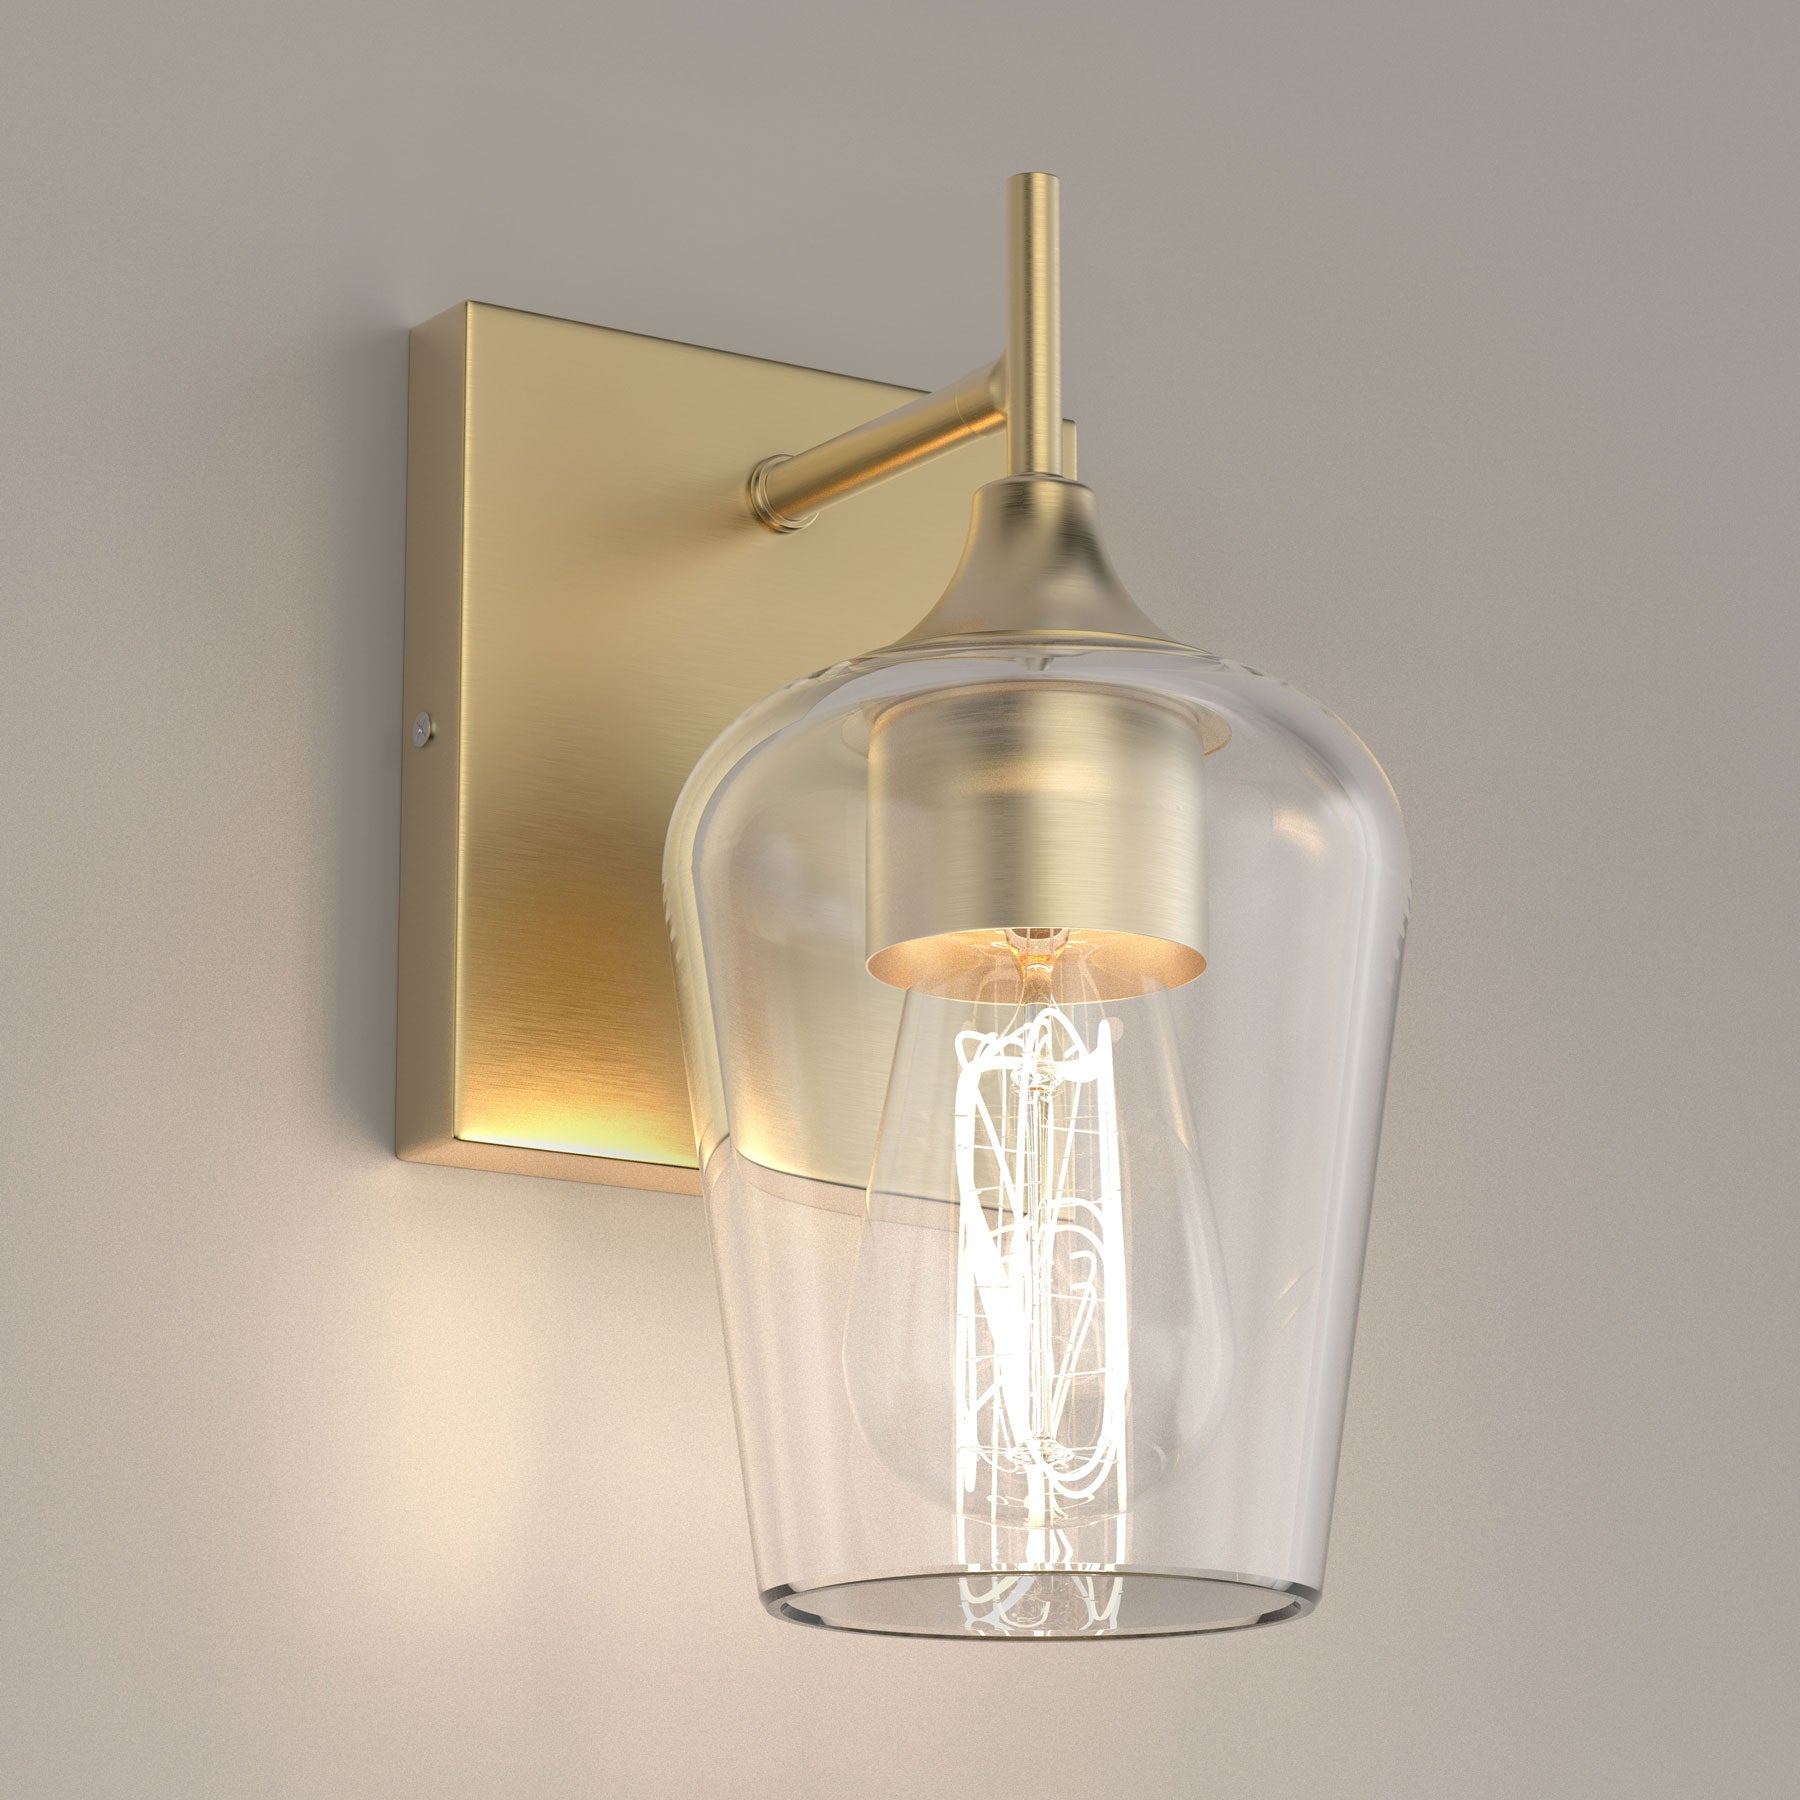 Clear Glass Shade Bathroom Light Fixtures, Bell Shape with Brass Gold Finish Vanity Lighting, E26 Base, UL Listed for Damp Location, Bathroom Wall Sconces